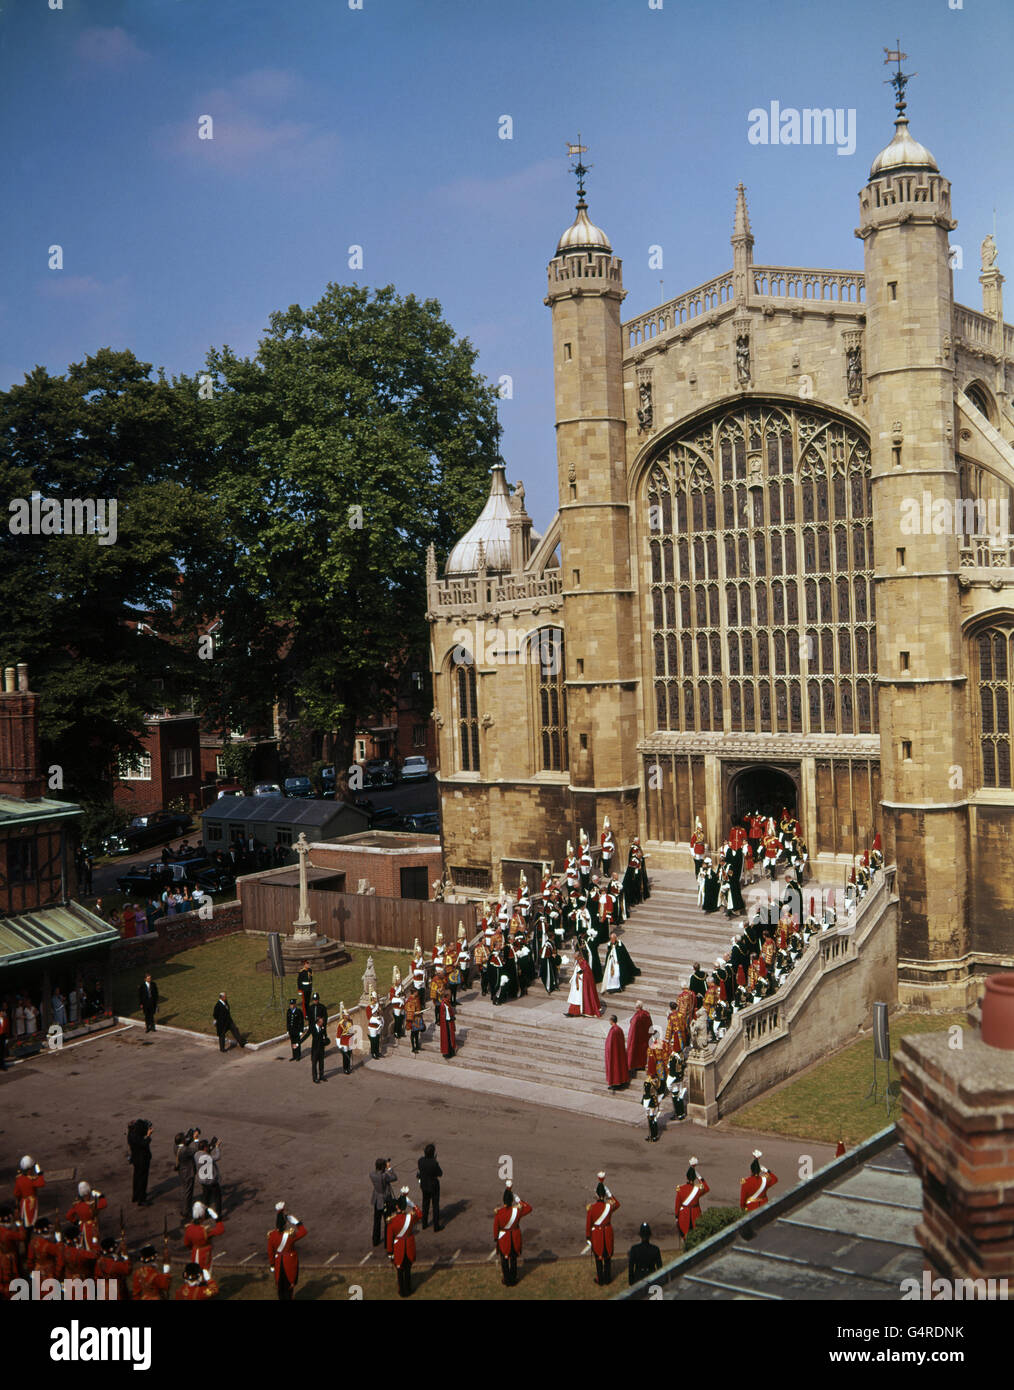 Queen Elizabeth II leaves St George's Chapel, Windsor after the Order of the Garter service. Stock Photo